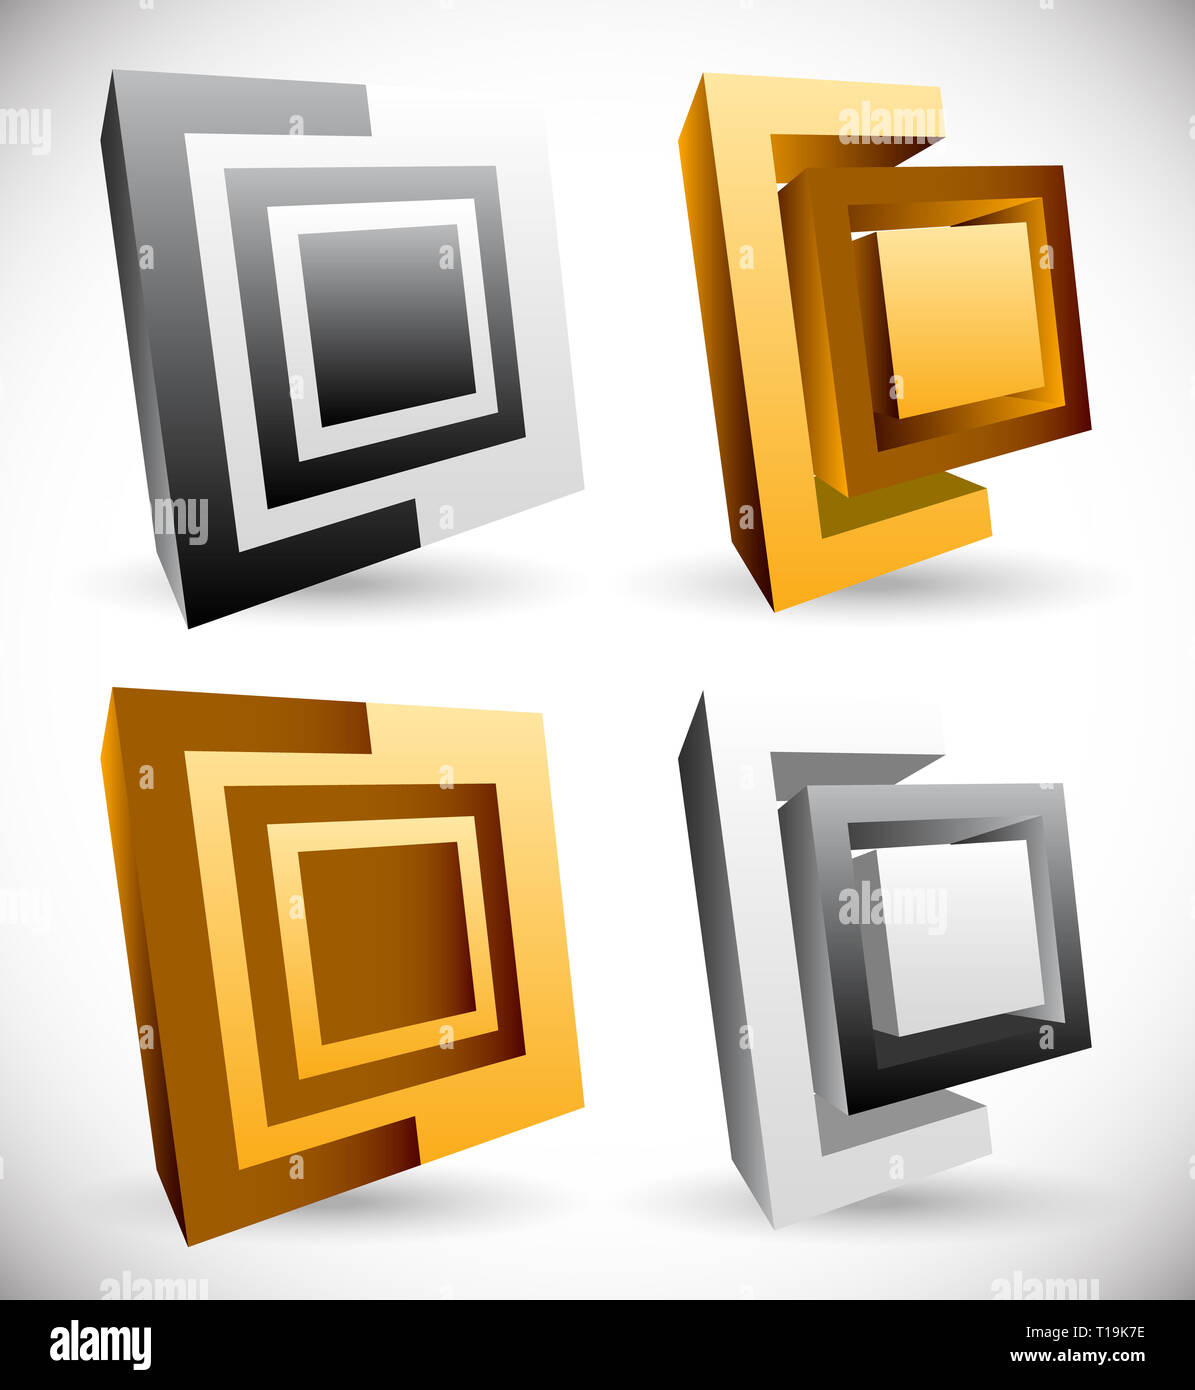 Gold And White Logos Stock Photos And Gold And White Logos Stock Images